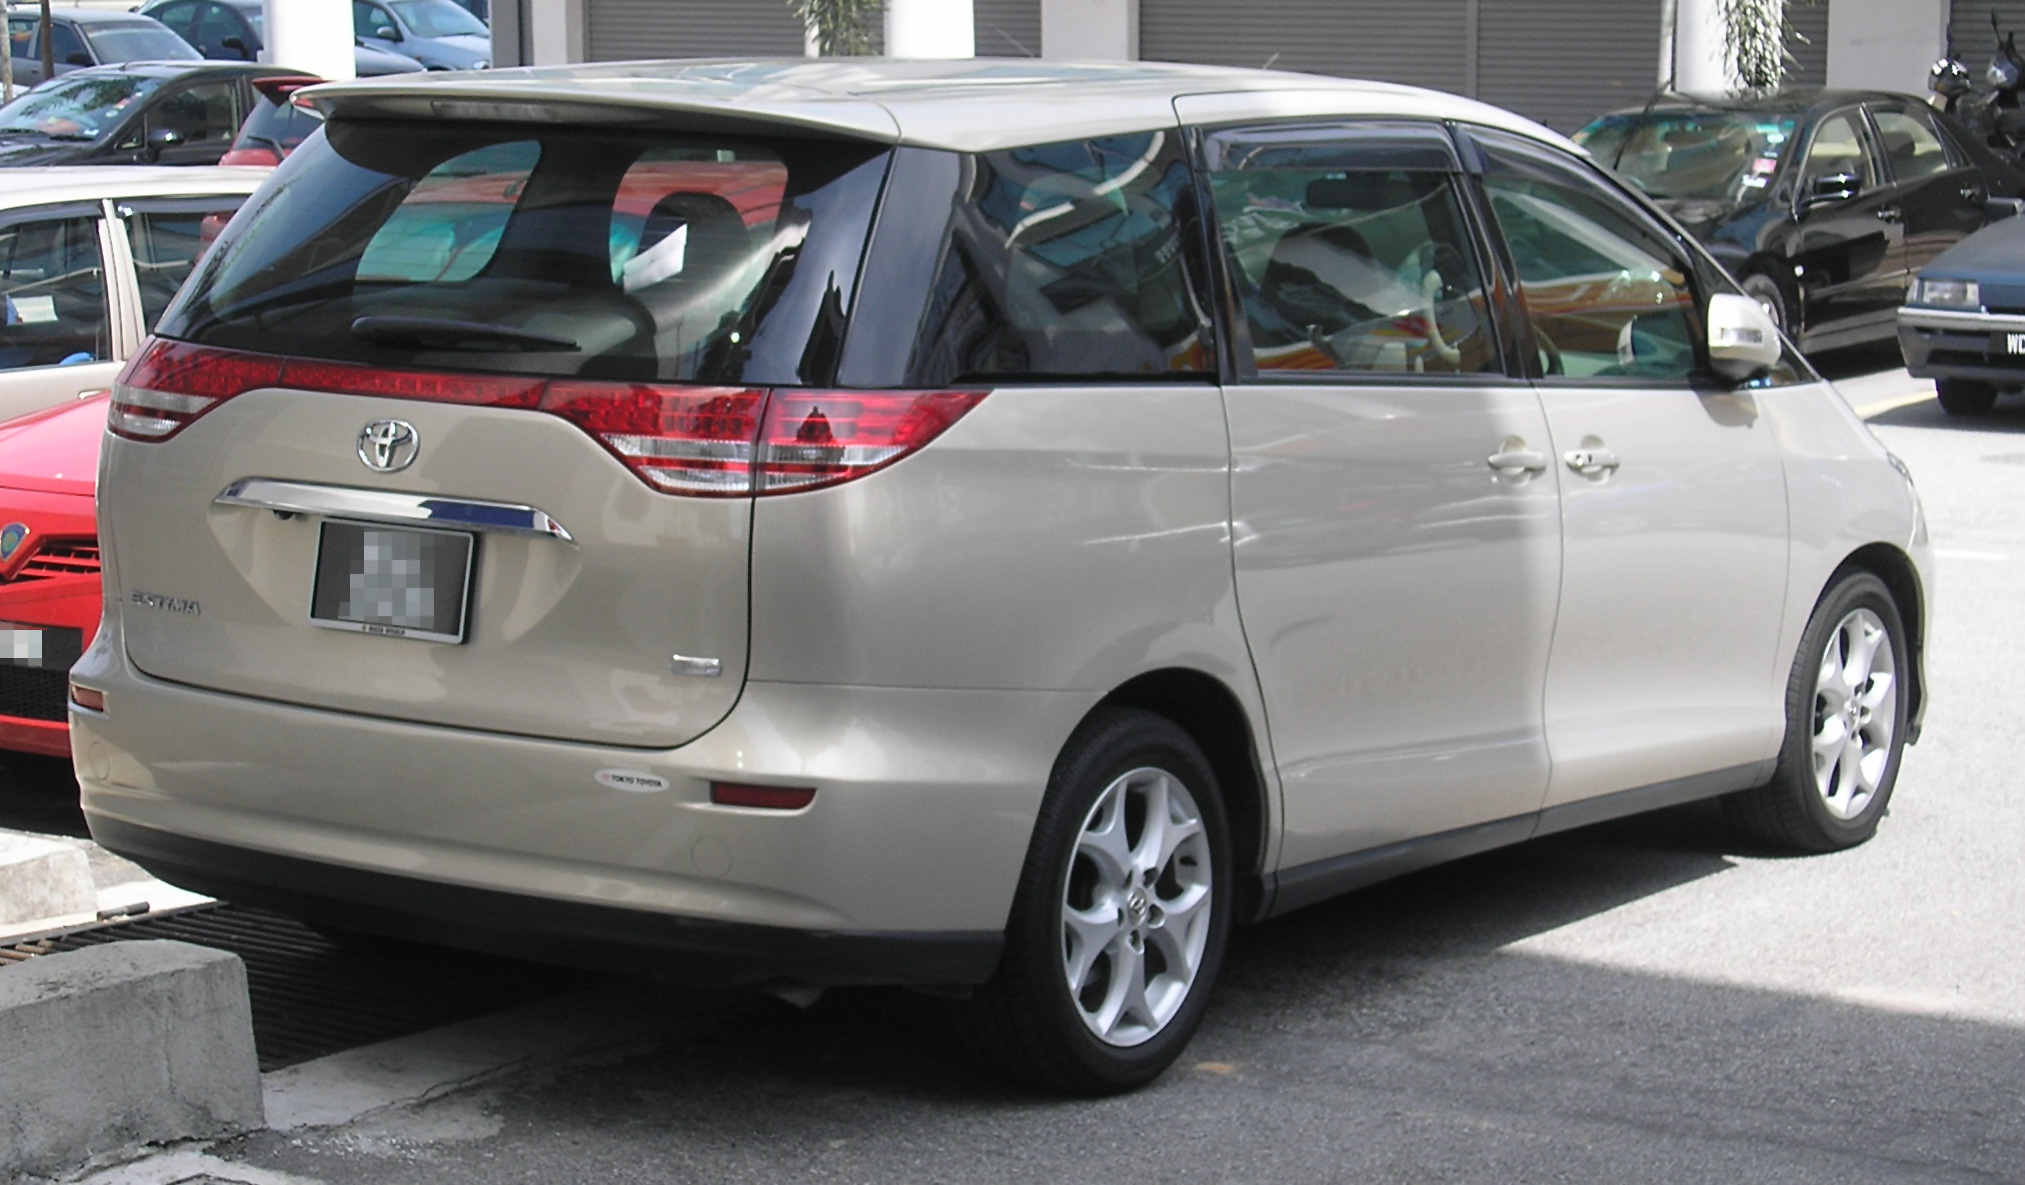 Toyota Estima 2020 Prices In Pakistan Pictures Reviews